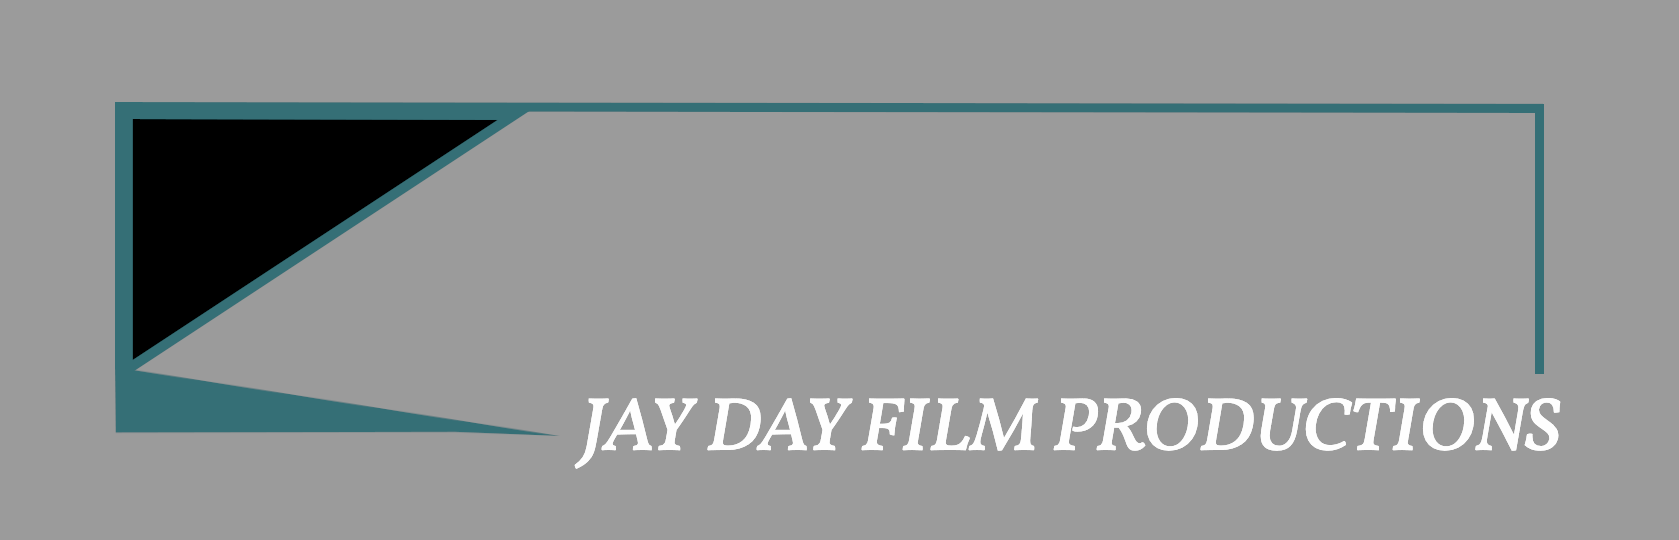 Jay Day Film Productions